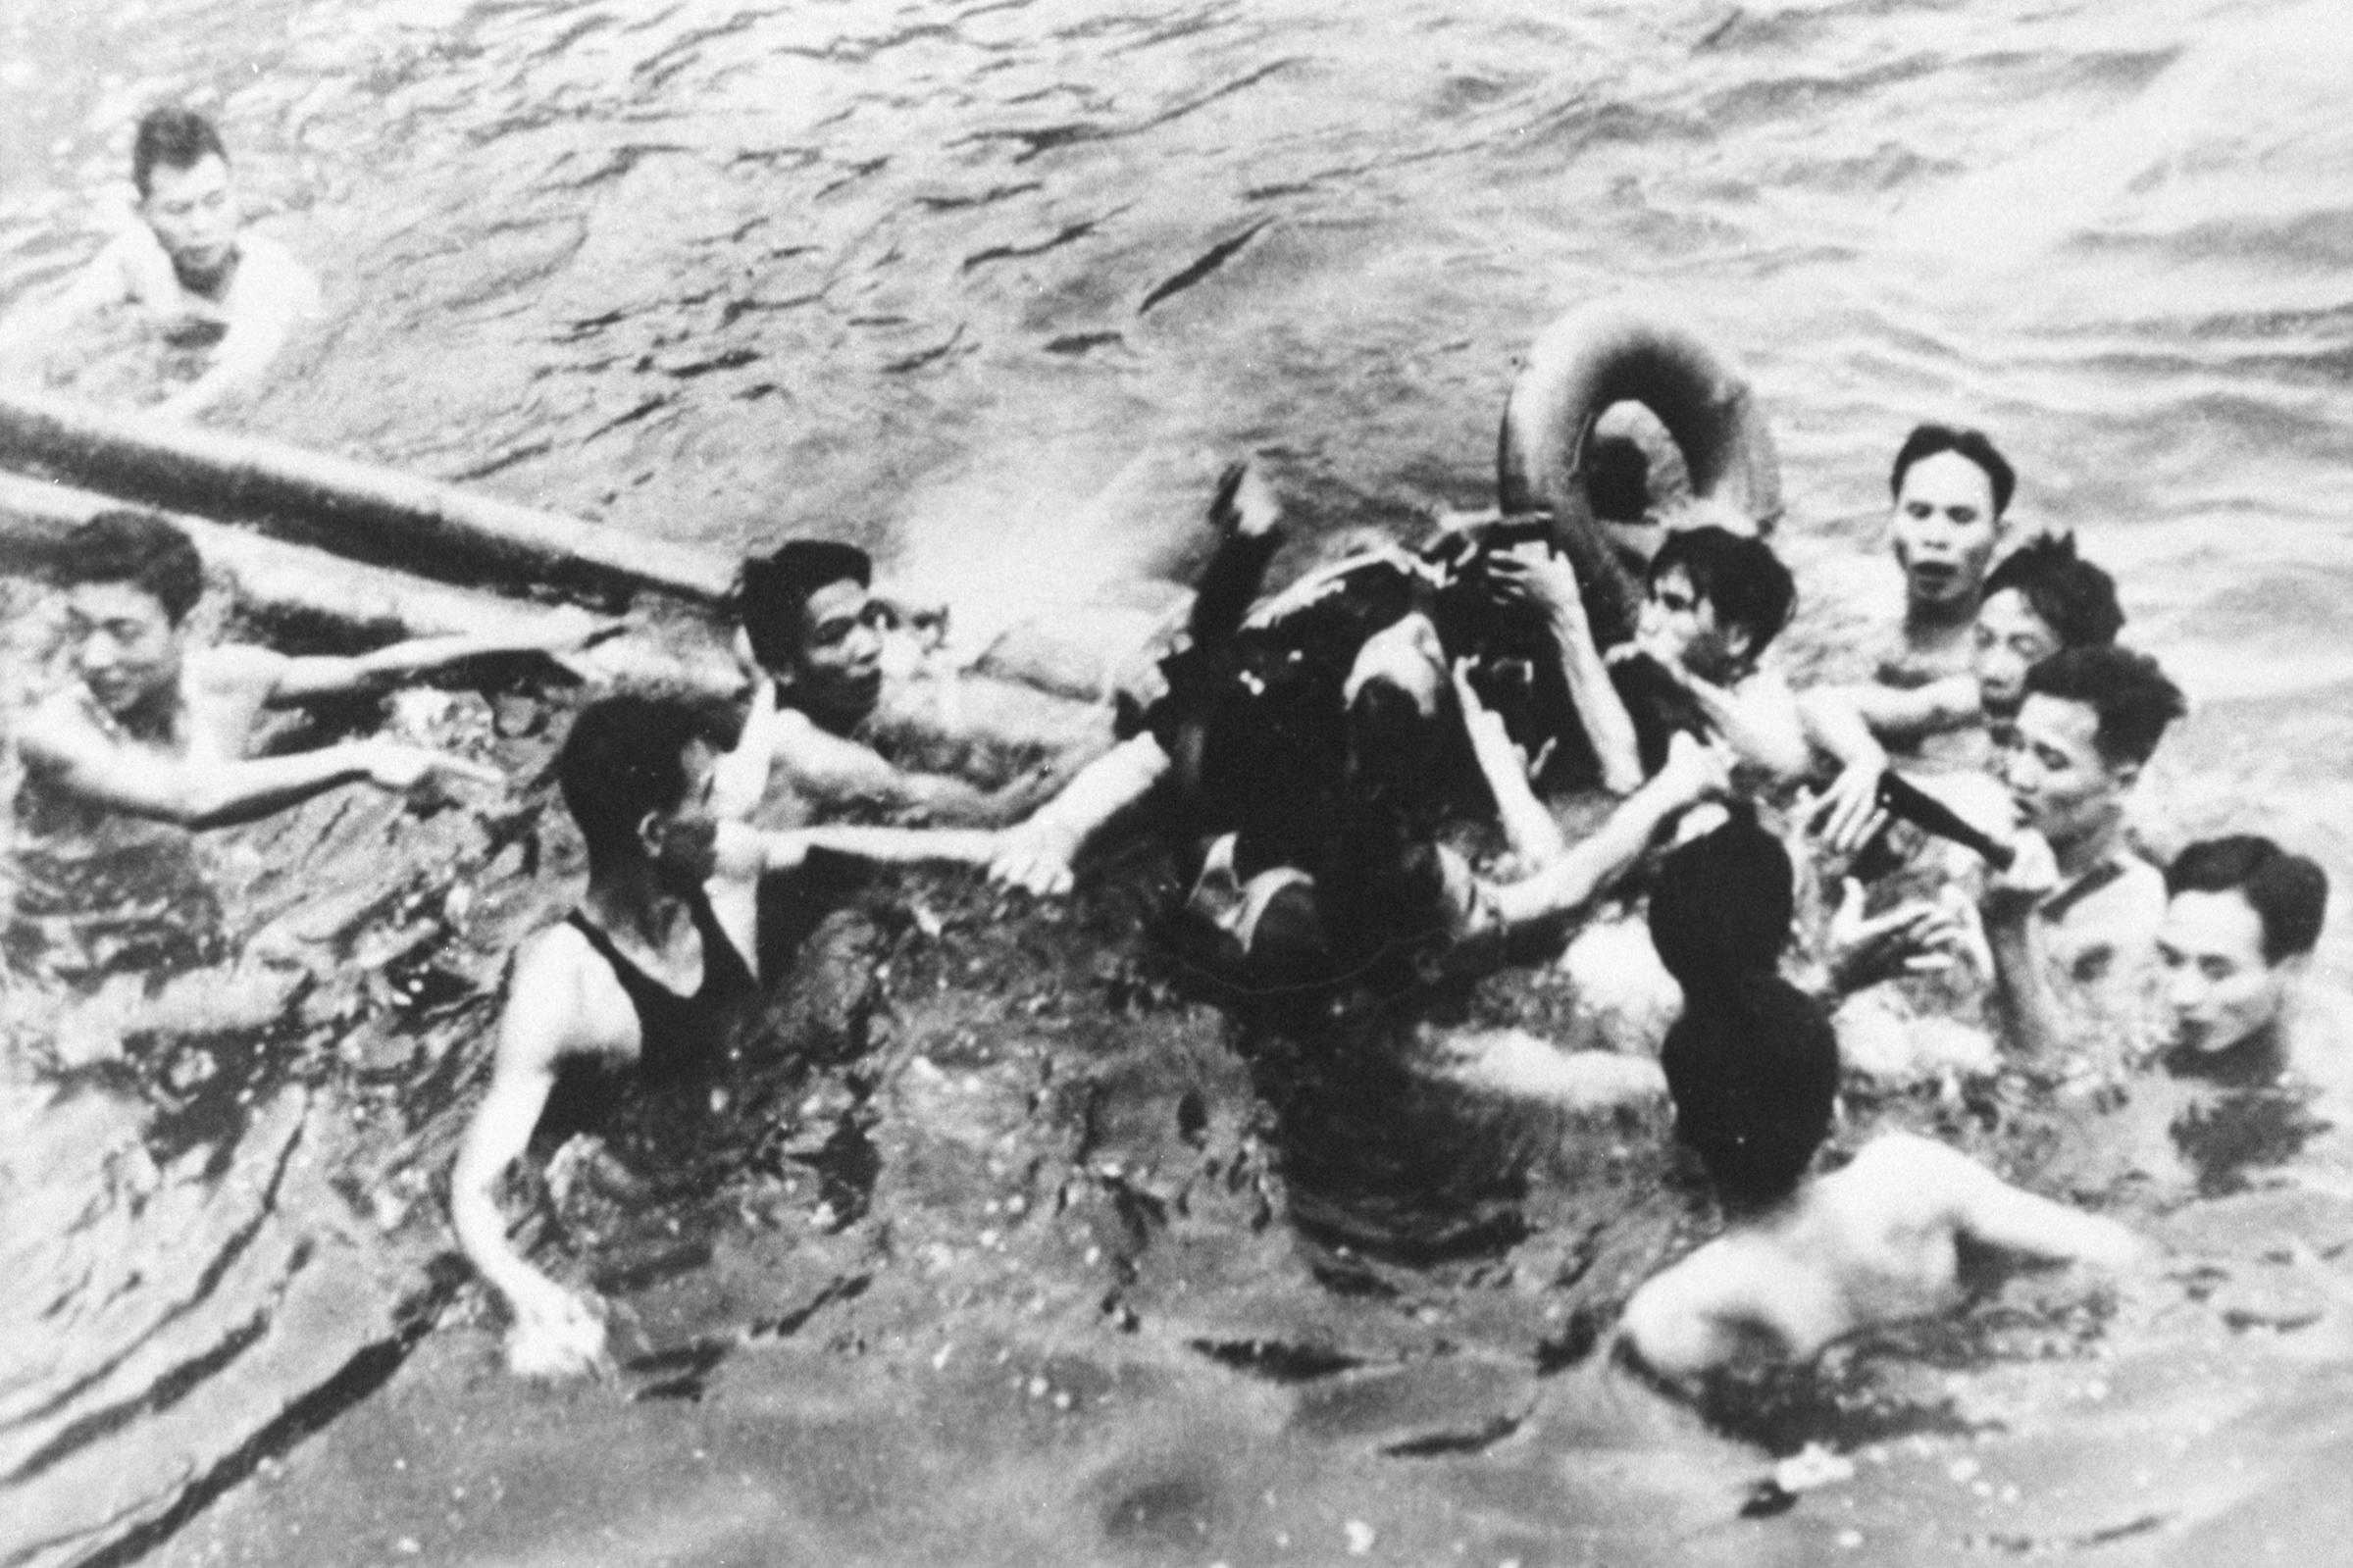 Senator John McCain is pulled out of a Hanoi lake by North Vietnamese army soldiers and civilians on Oct. 26, 1967.